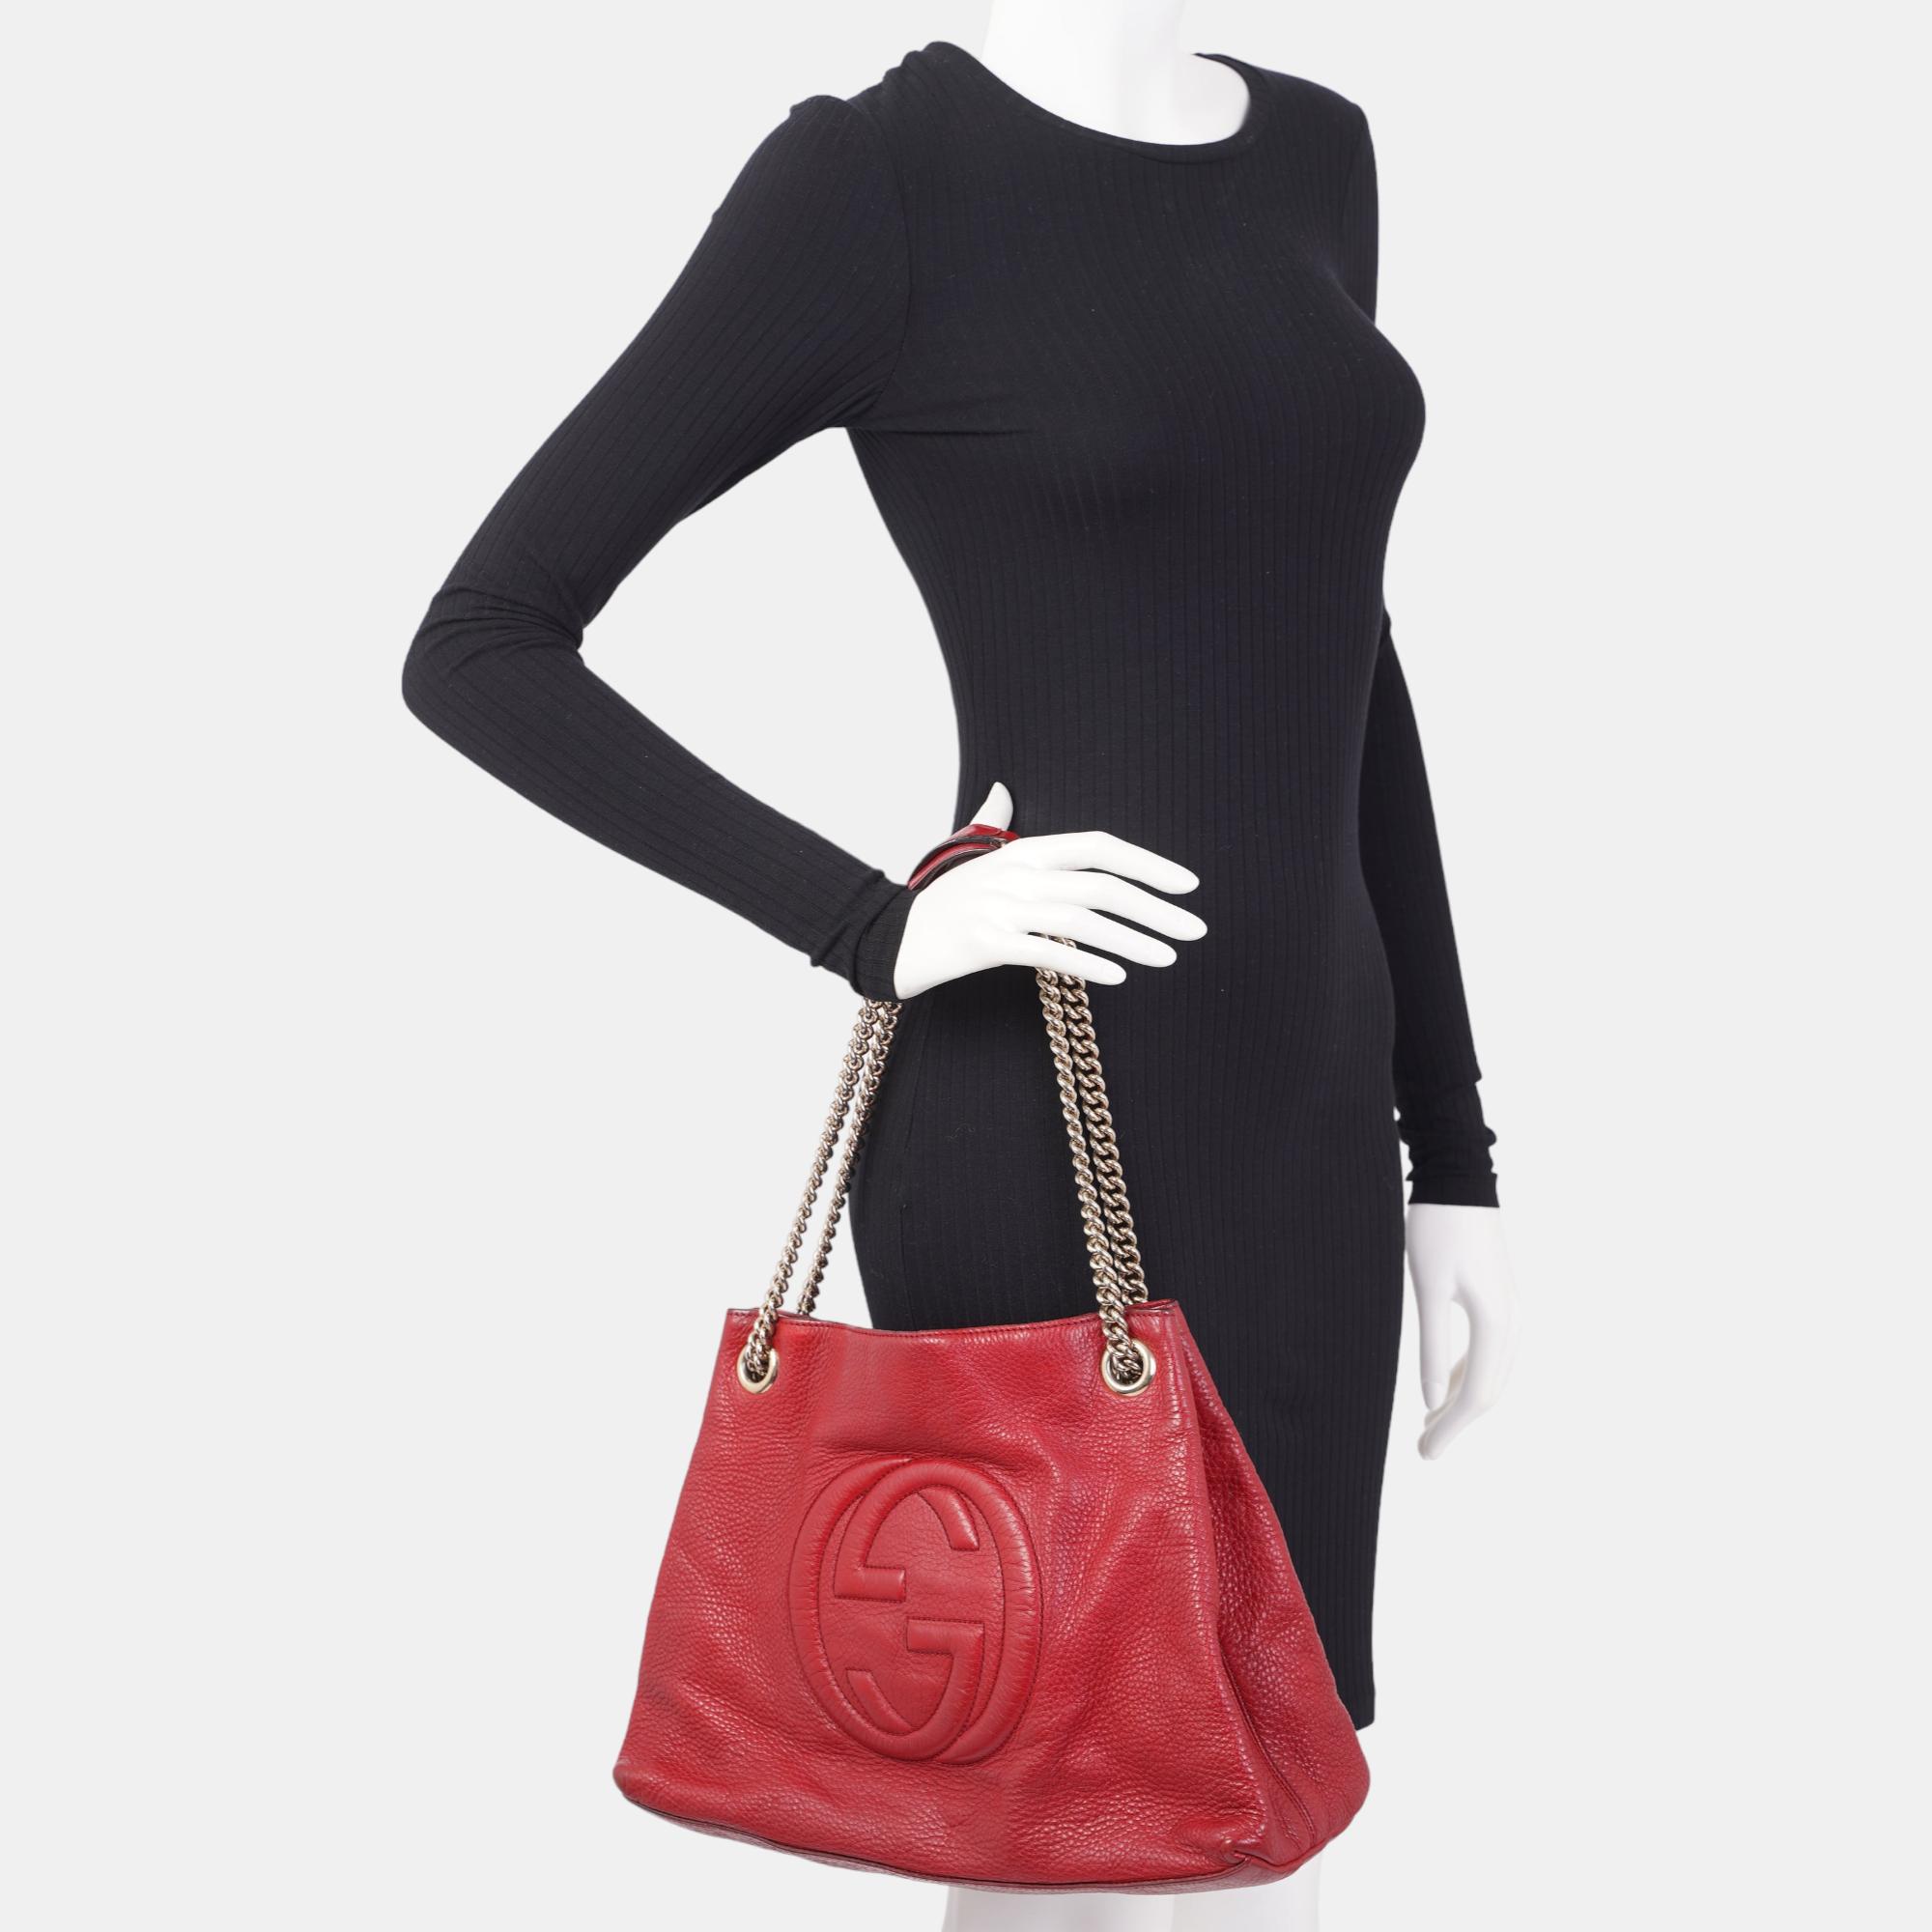 Gucci Soho Tote Red Leather